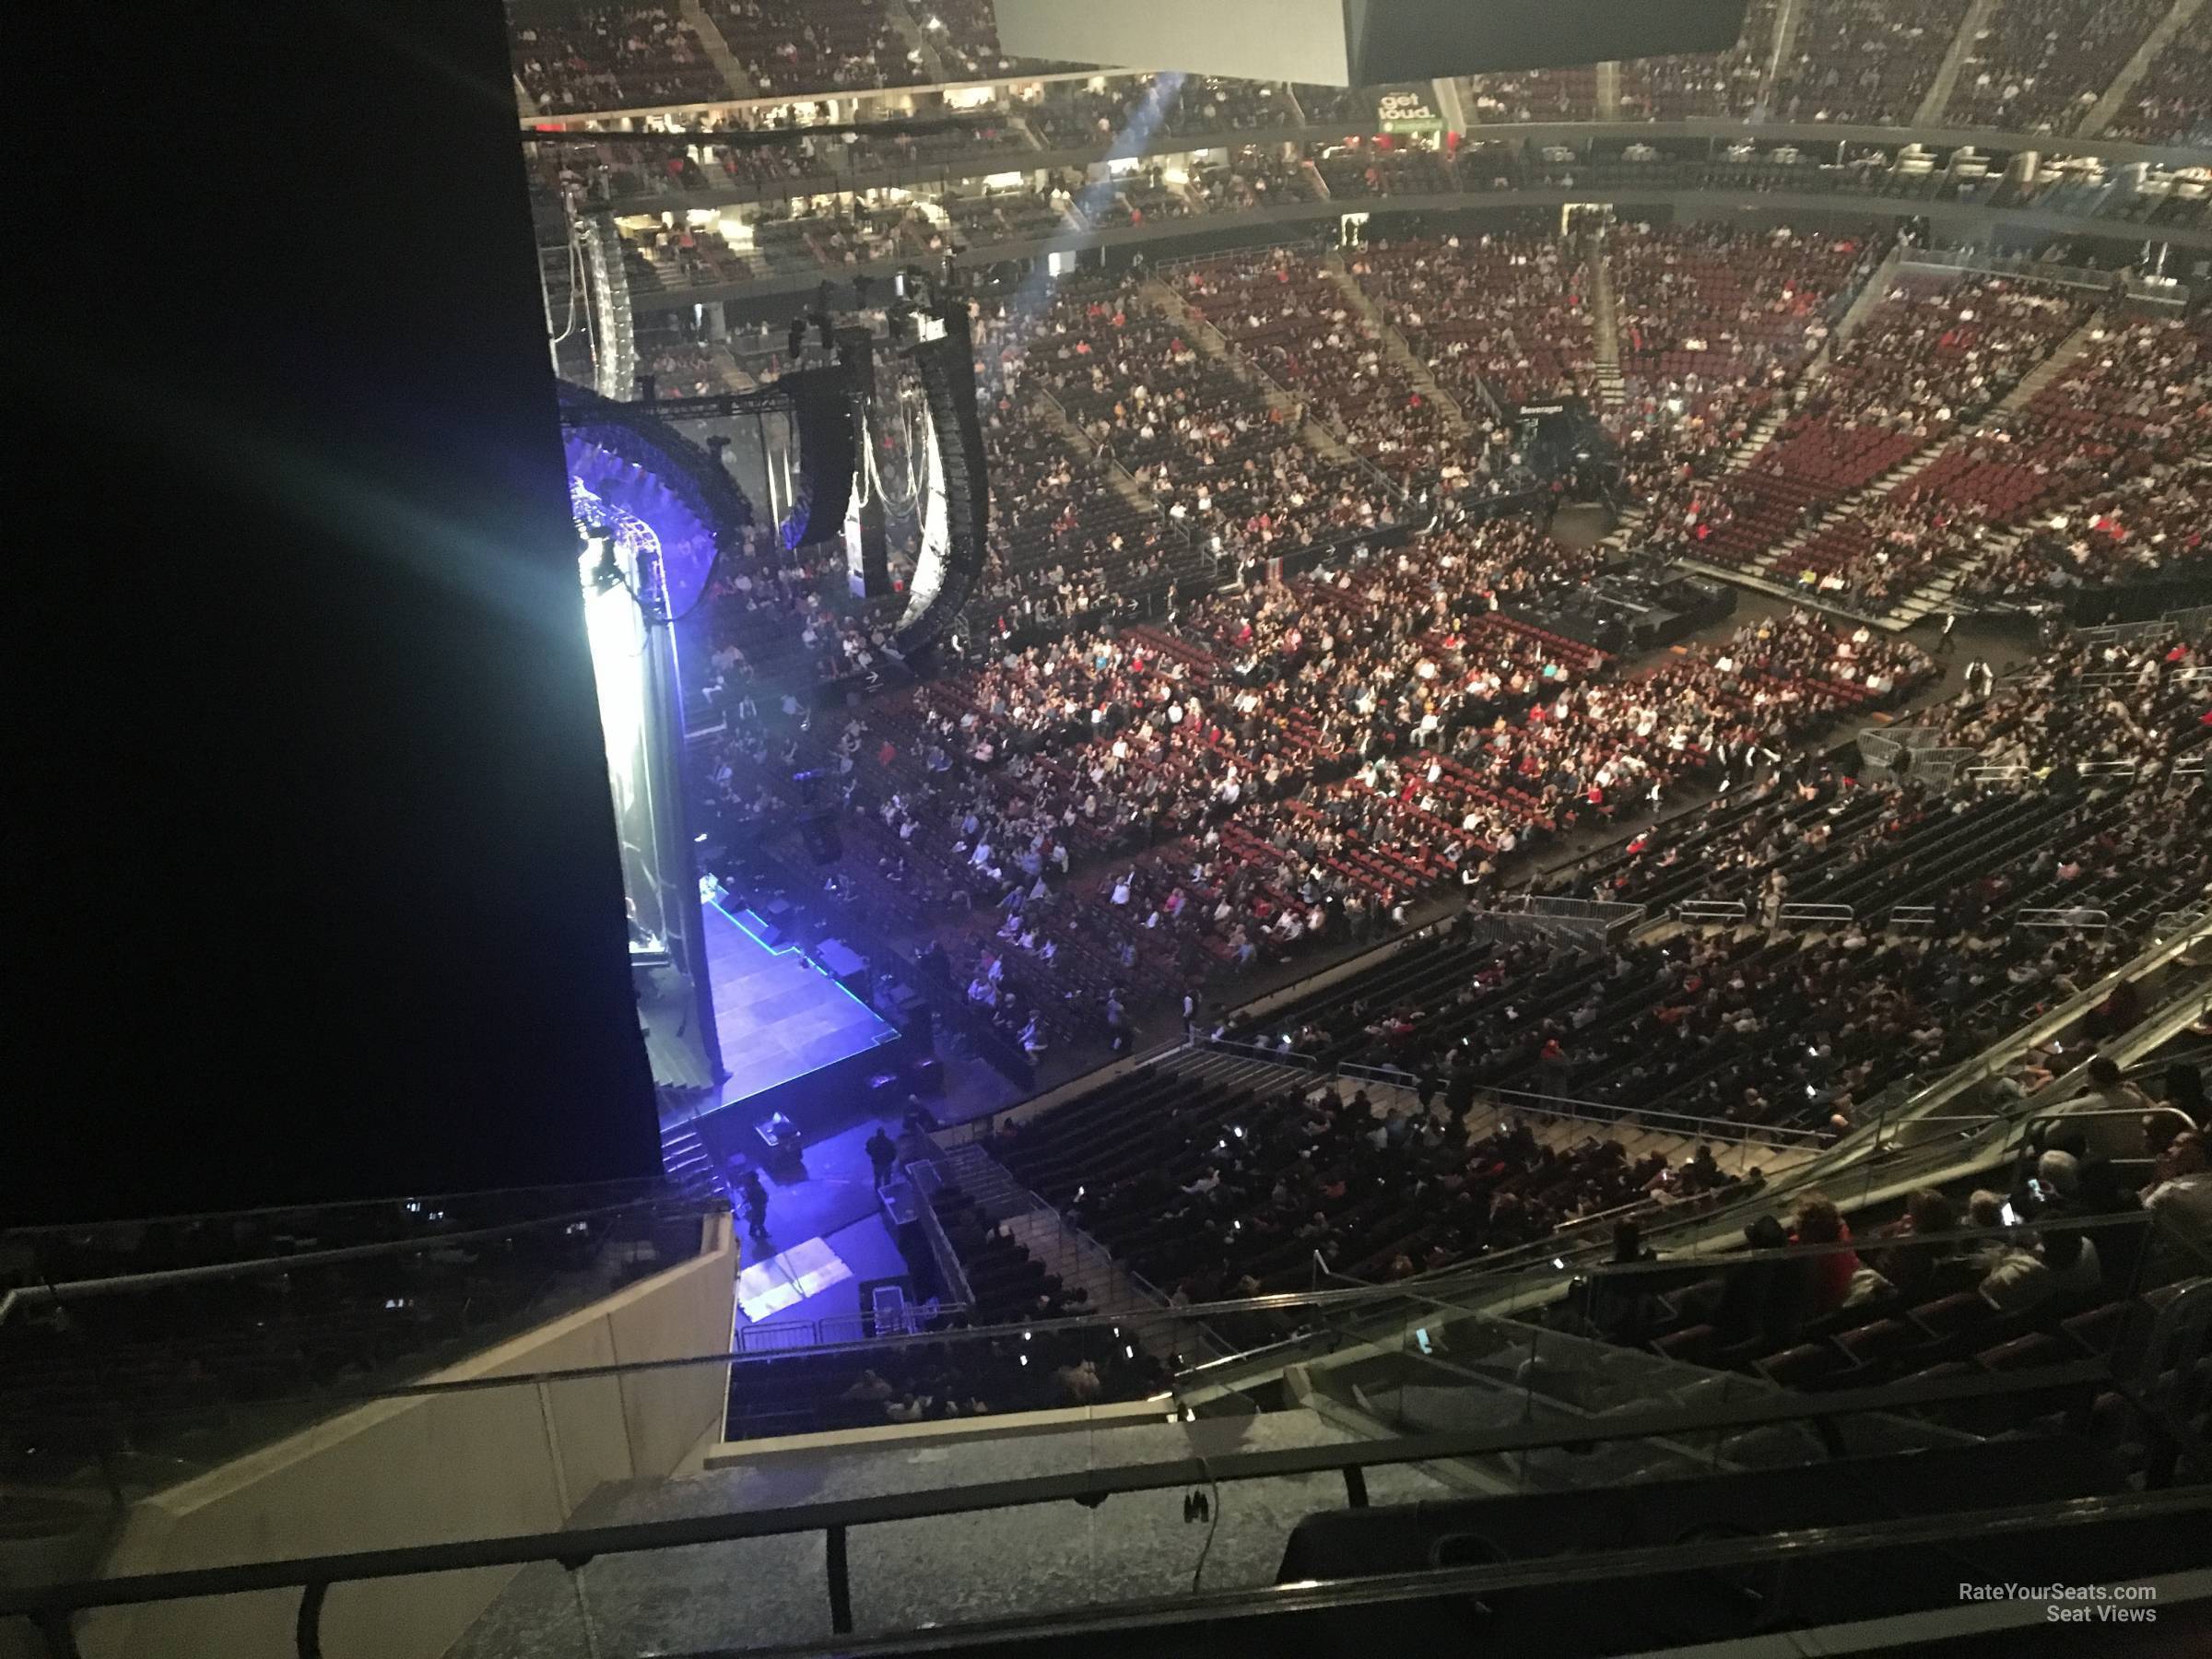 Section 225 at Prudential Center for Concerts